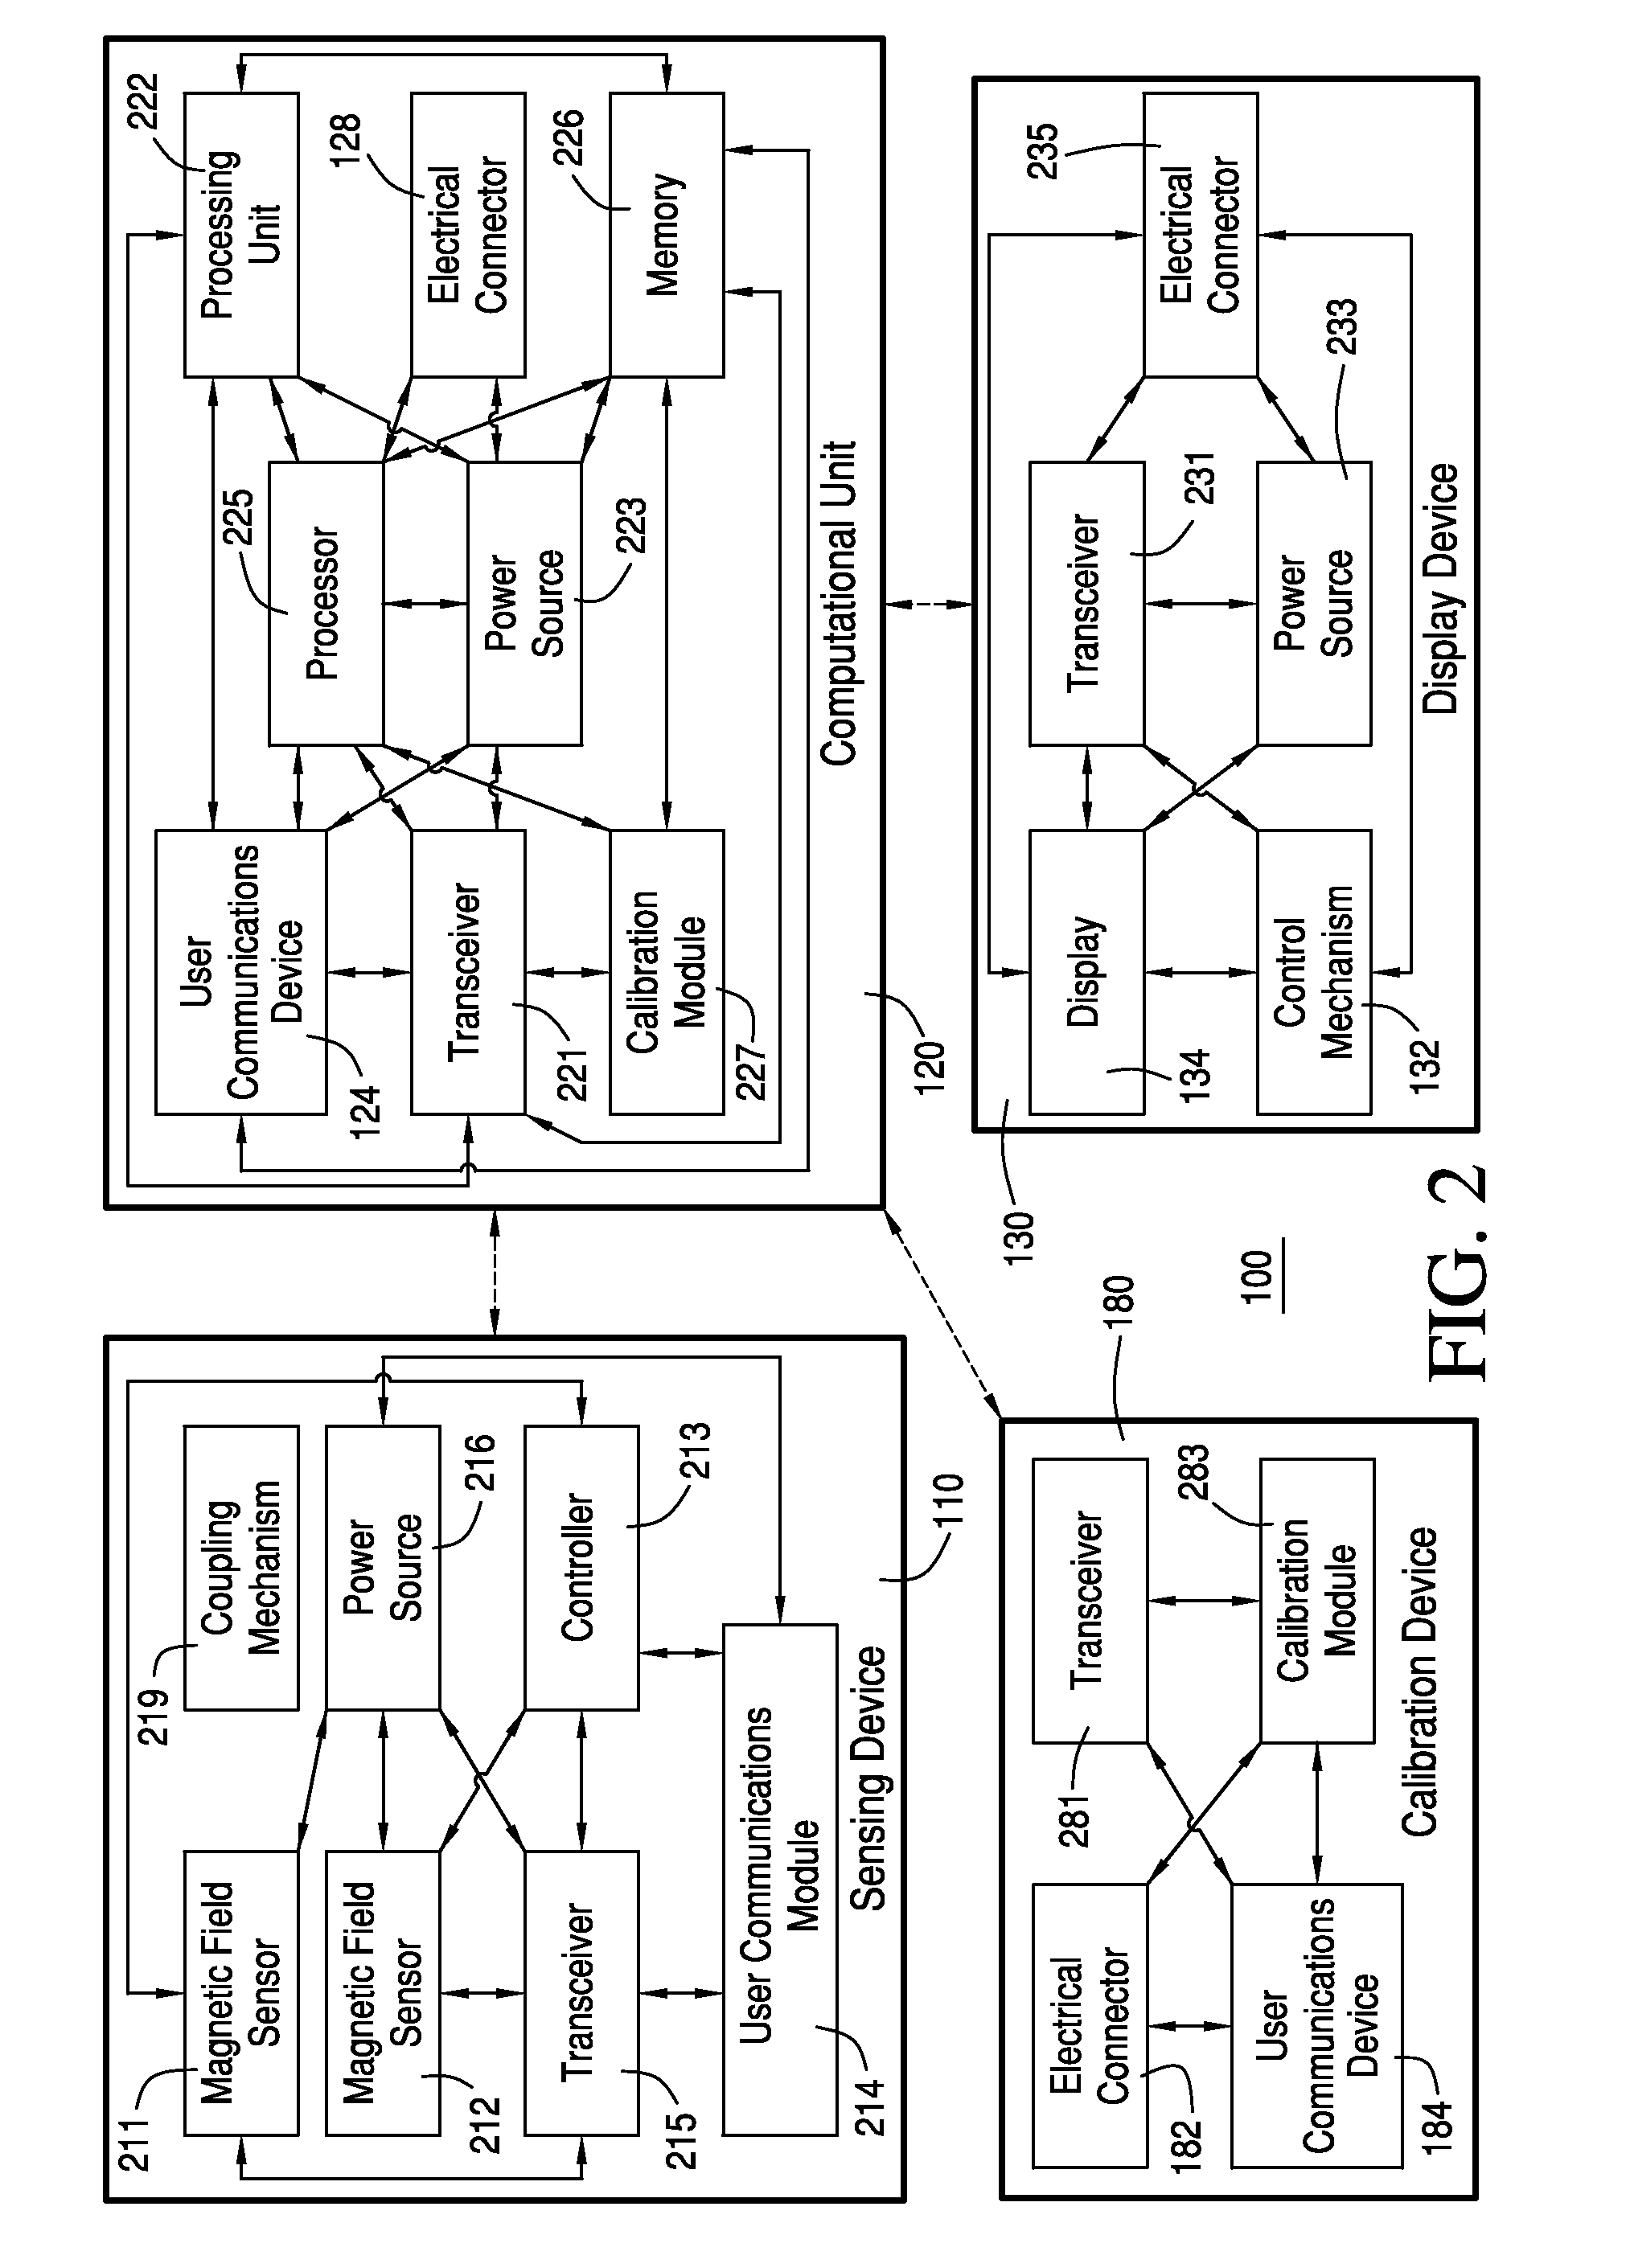 System for Monitoring Electrical Power Usage of a Structure and Method of Same